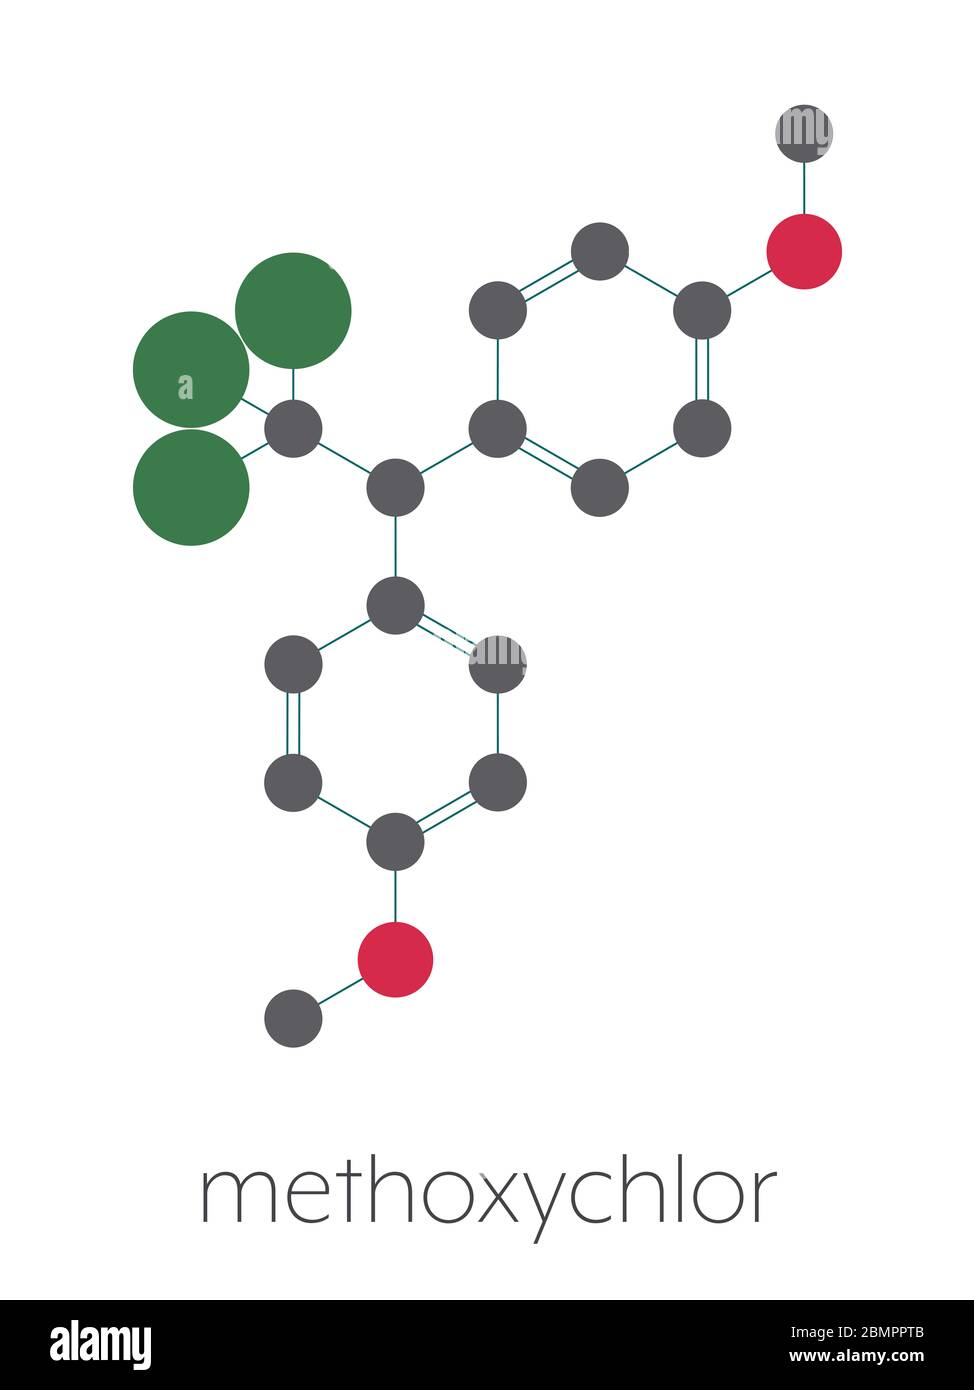 Methoxychlor pesticide molecule. Stylized skeletal formula (chemical structure): Atoms are shown as color-coded circles: hydrogen (hidden), carbon (grey), oxygen (red), chlorine (green). Stock Photo